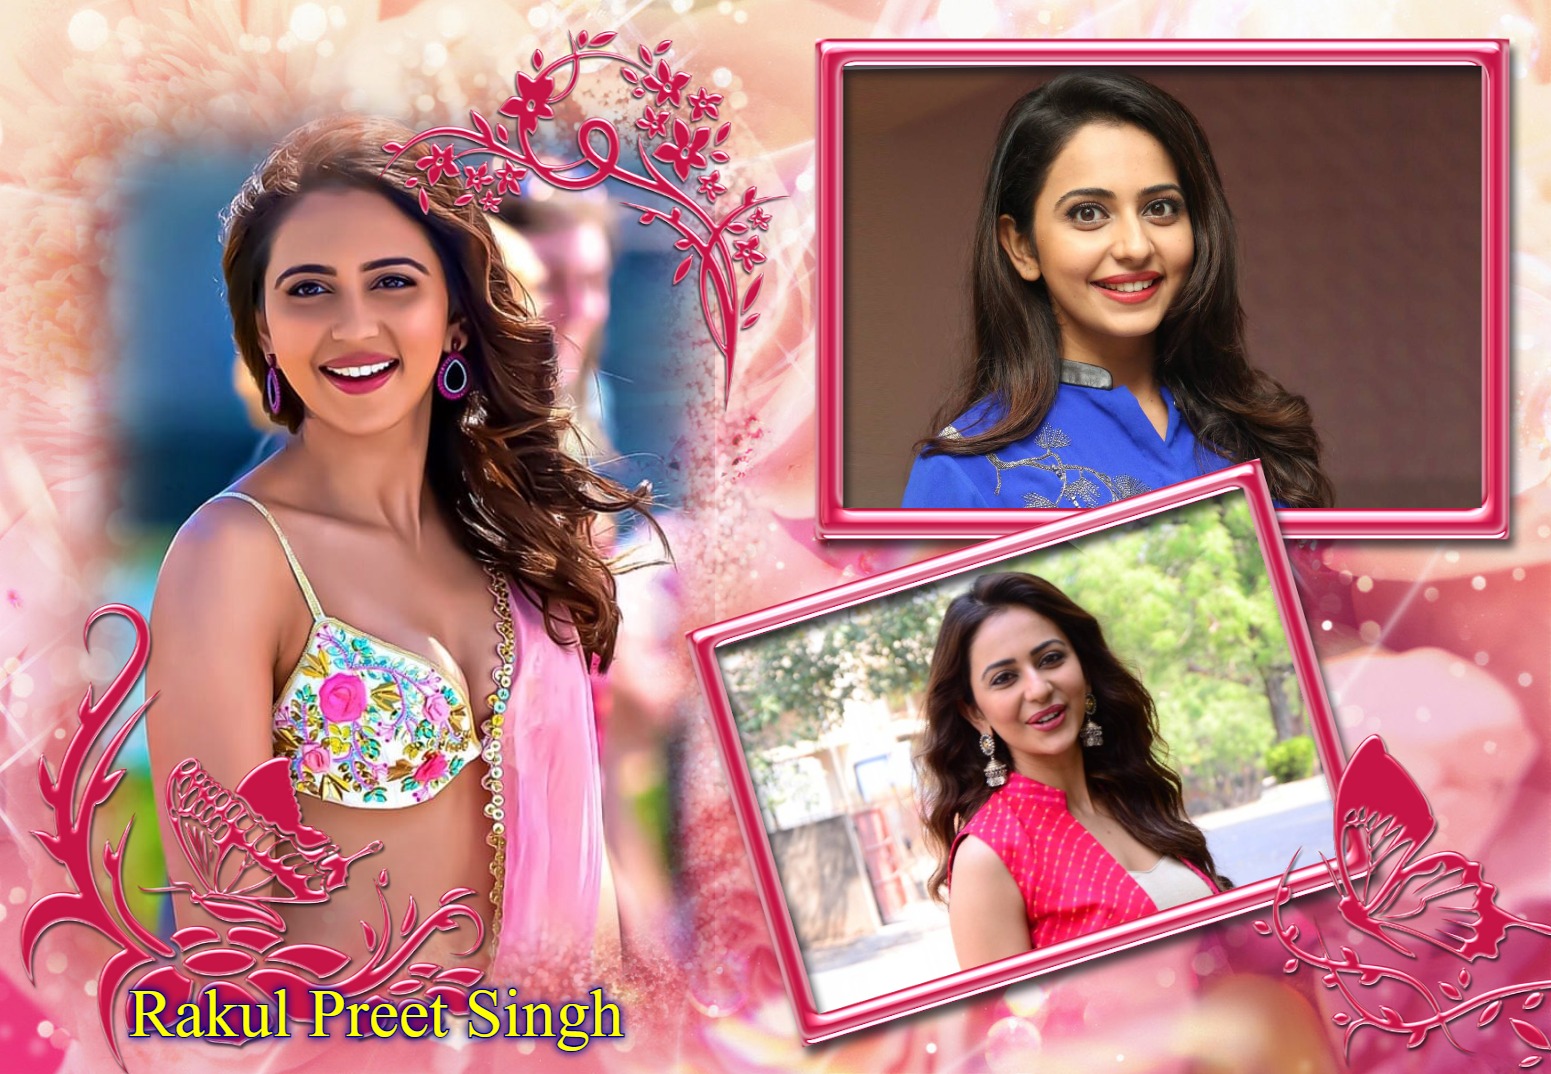 You are currently viewing ” Loveliness Personified Cutie- Rakul Preet Singh”